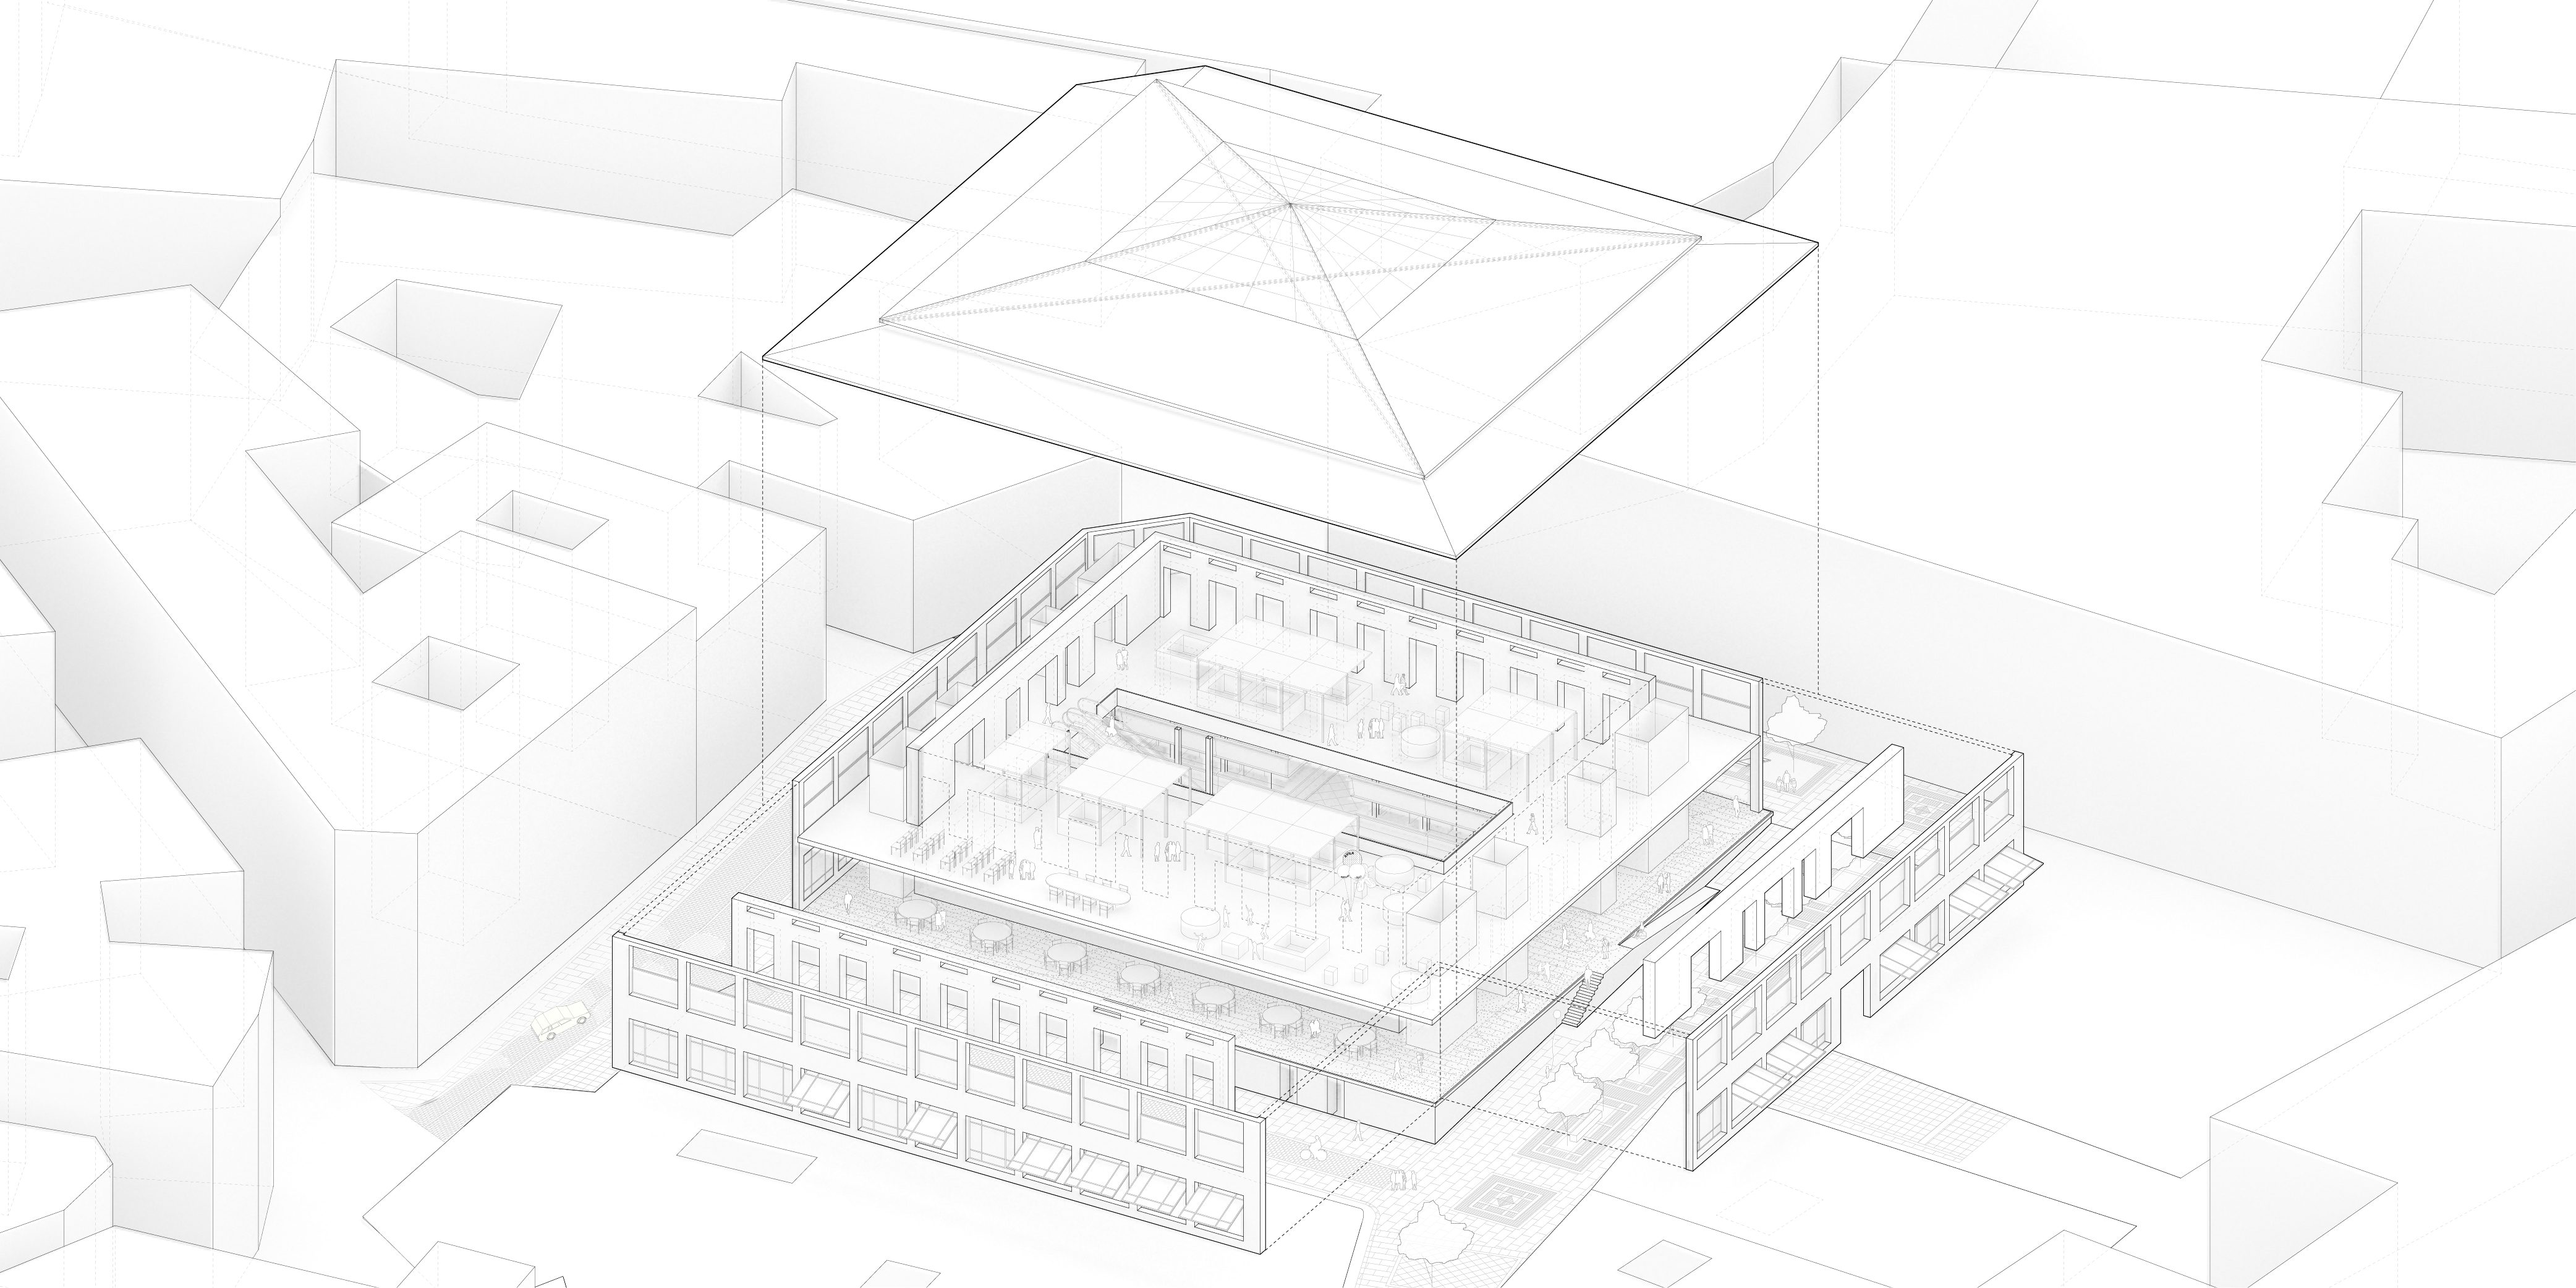 Axonometric drawing of the whole project showing the elements which compose the building